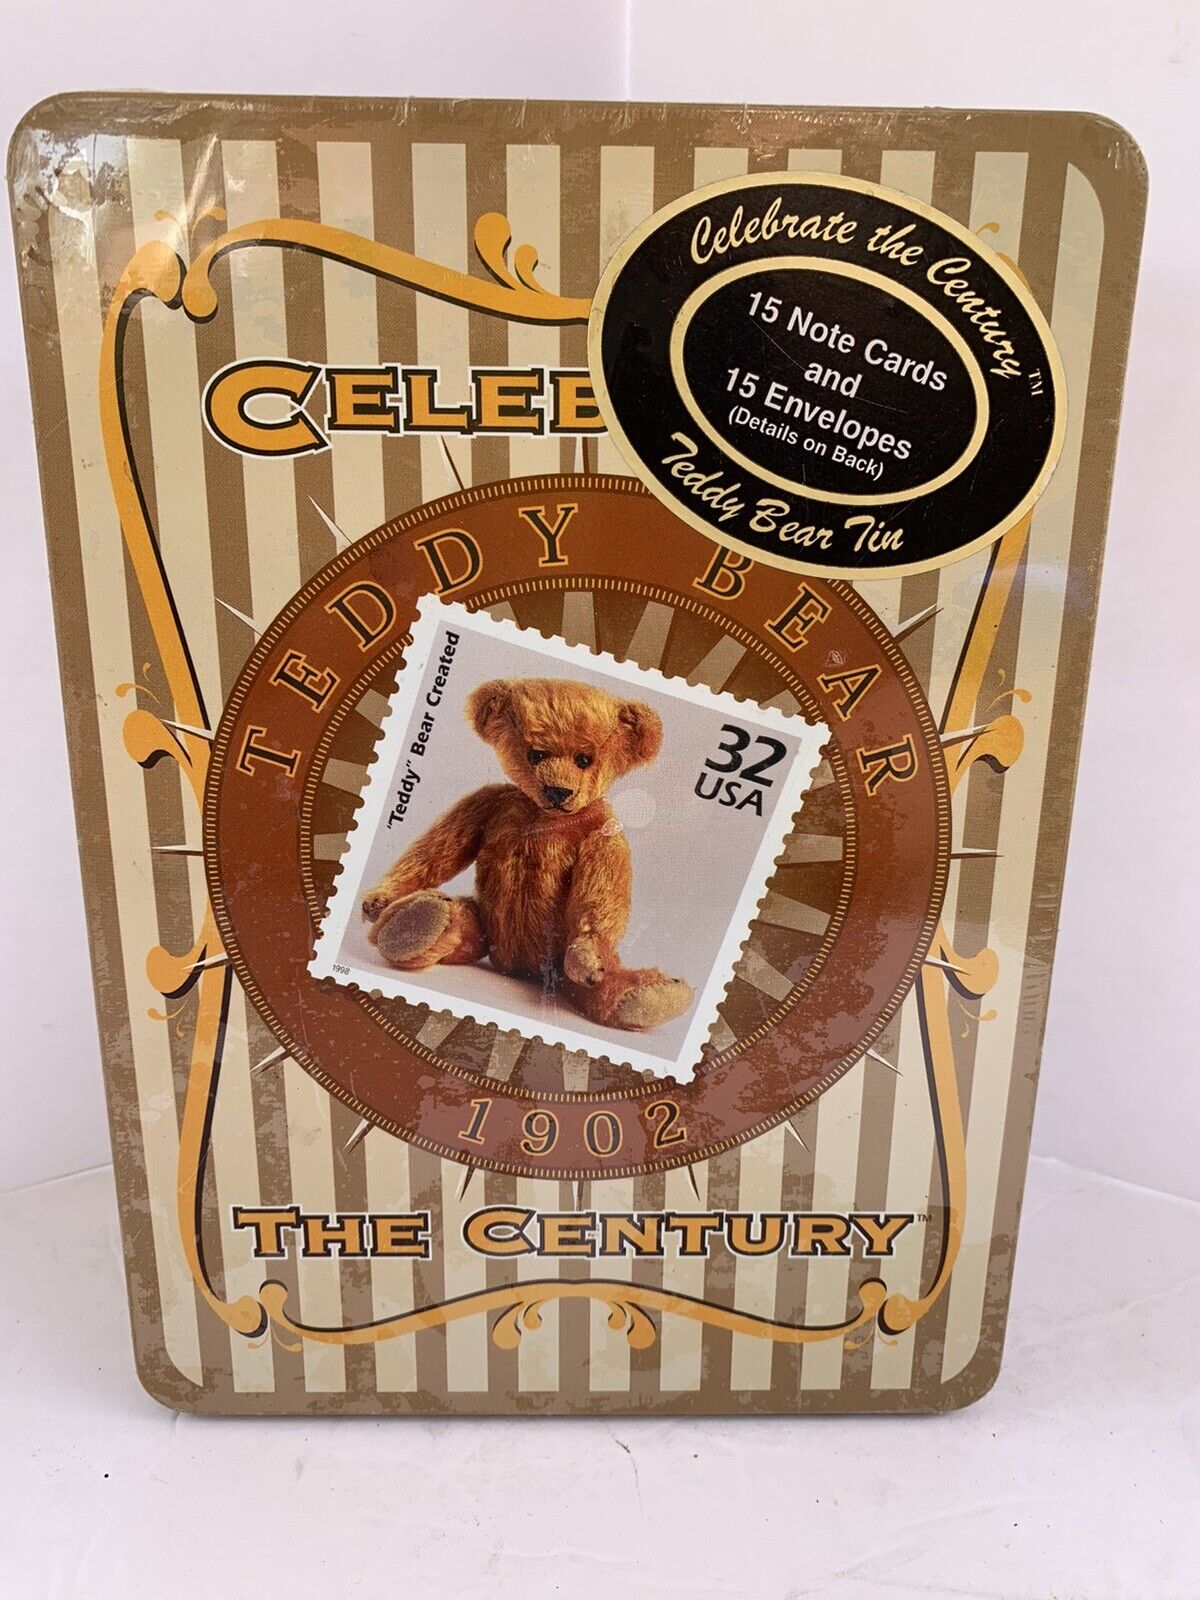 Teddy Bear Tin W/Notecards USPS Celebrate The Century 1902 15 Notecards And Env